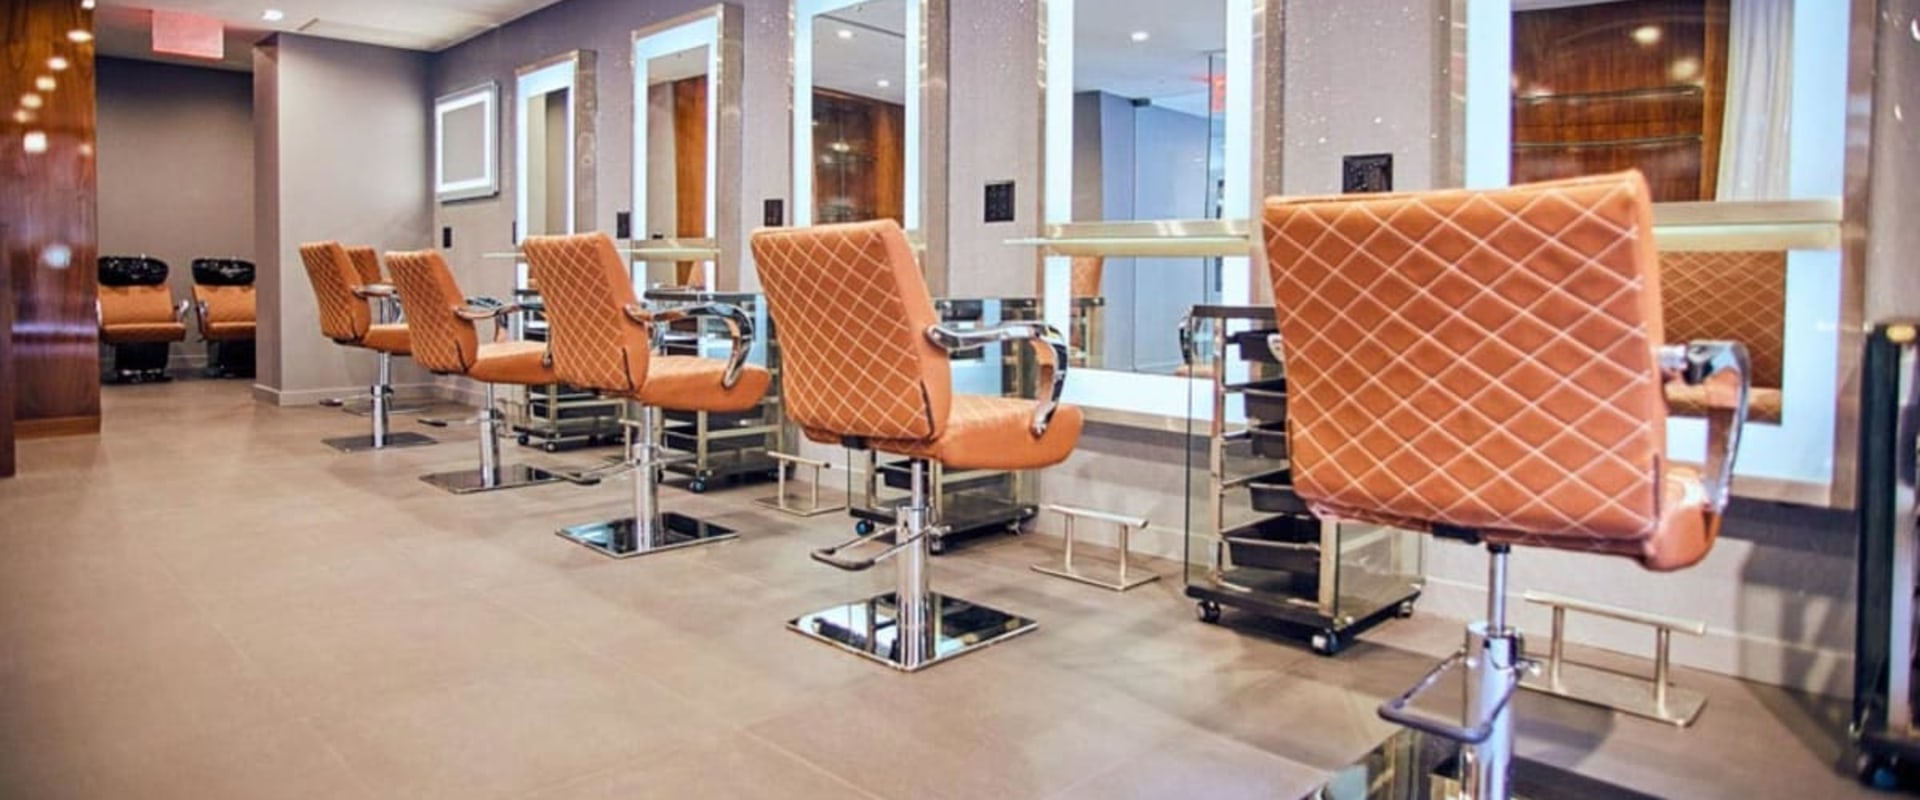 Expert's Guide to the Best Salons in Buffalo, NY